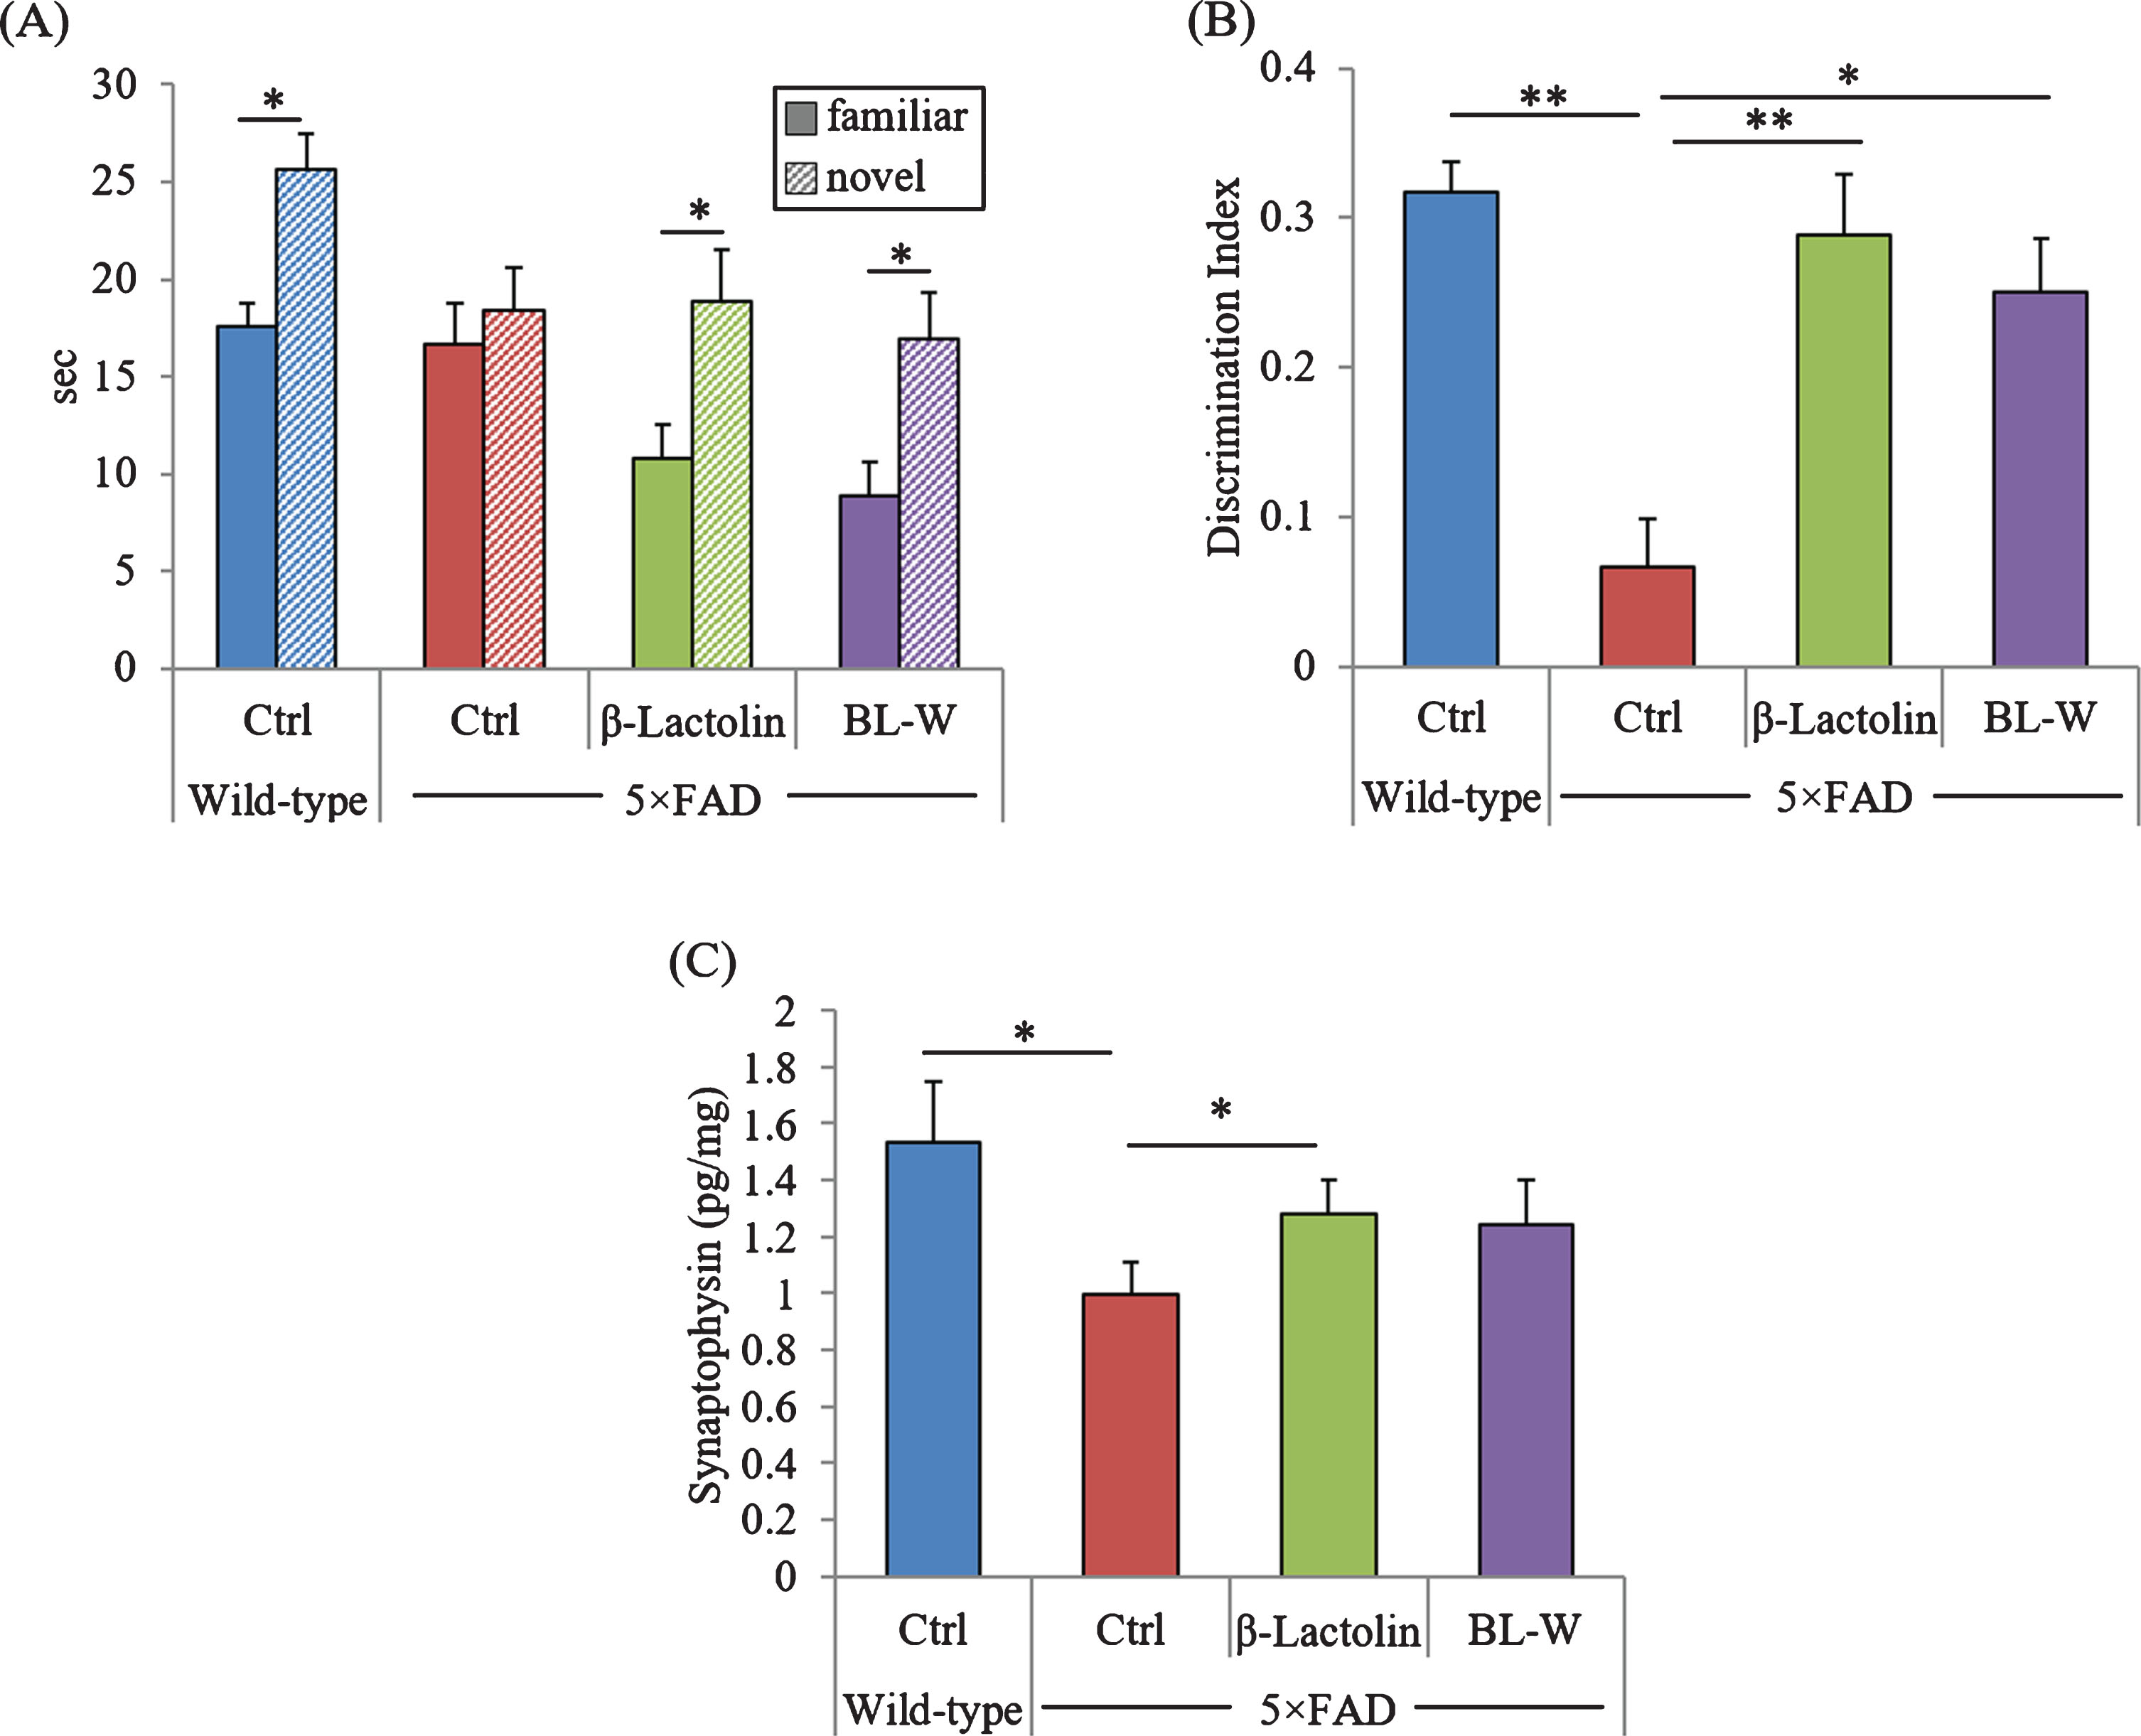 Effects of β-lactolin on memory function in 5×FAD mice. Transgenic 5×FAD and wild-type male mice aged 2.5 months were fed a diet with or without 0.05% w/w β-lactolin or 5% w/w β-lactolin-rich whey enzymatic digestion (BL-W) for 3.5 months. Mice aged 6 months were subjected to the novel object recognition test to evaluate object recognition memory. A, B) The time spent exploring novel and familiar objects during 5 min of re-exploration (A) and the discrimination index [(time spent with object A – time spent with object B) / total time exploring both objects] (B) were measured. C) The levels of synaptophysin in the frontal cortex. Data are presented as means±SEM (sample size: wild-type mice, 10; control transgenic mice, 10; transgenic mice fed with β-lactolin, 11; or transgenic mice fed with BL-W, 10). p-values shown in the graph were calculated by student t-test or one-way ANOVA followed by the Tukey–Kramer test. *p < 0.05, **p < 0.01.